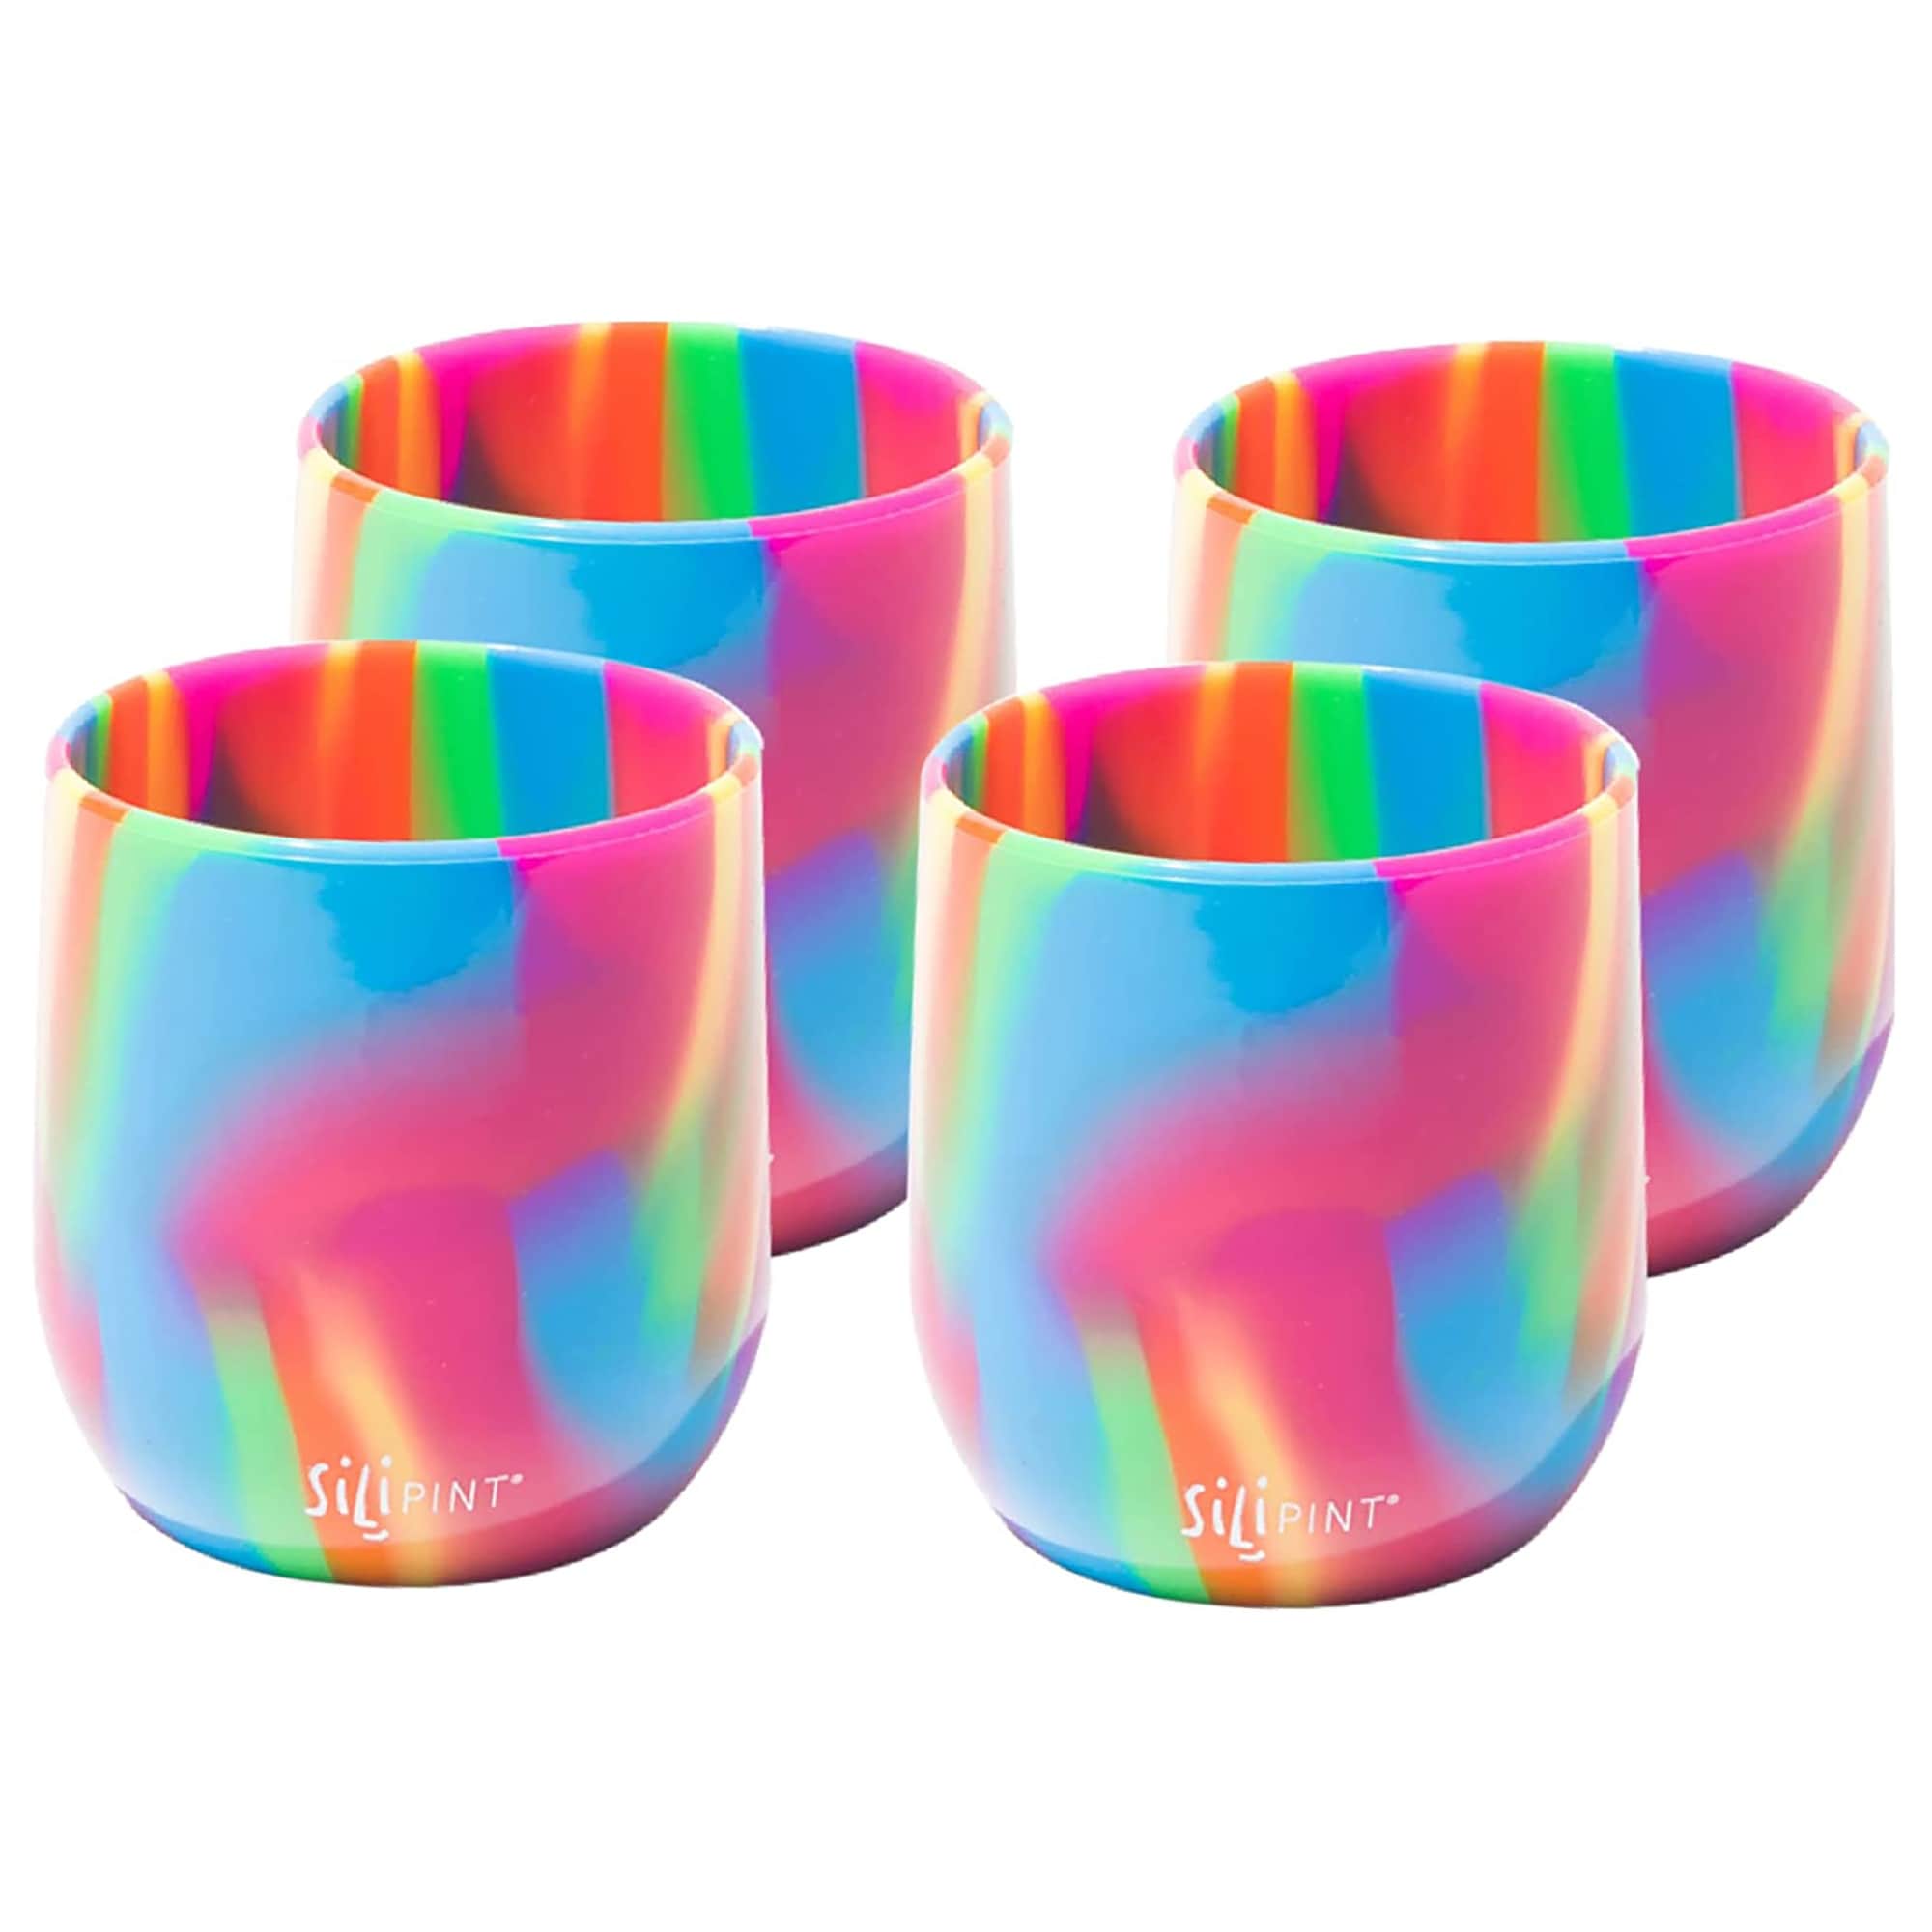 https://ak1.ostkcdn.com/images/products/is/images/direct/8e1c93e75533d4336e1b3095be6001beb668e3c9/Silipint%3A-Silicone-12oz-Stemless-Wine-Glasses%3A-4-Pack-Hippie-Hops---Reusable-Flexible-%26-Unbreakable-Cups%2C-Hot-Cold.jpg